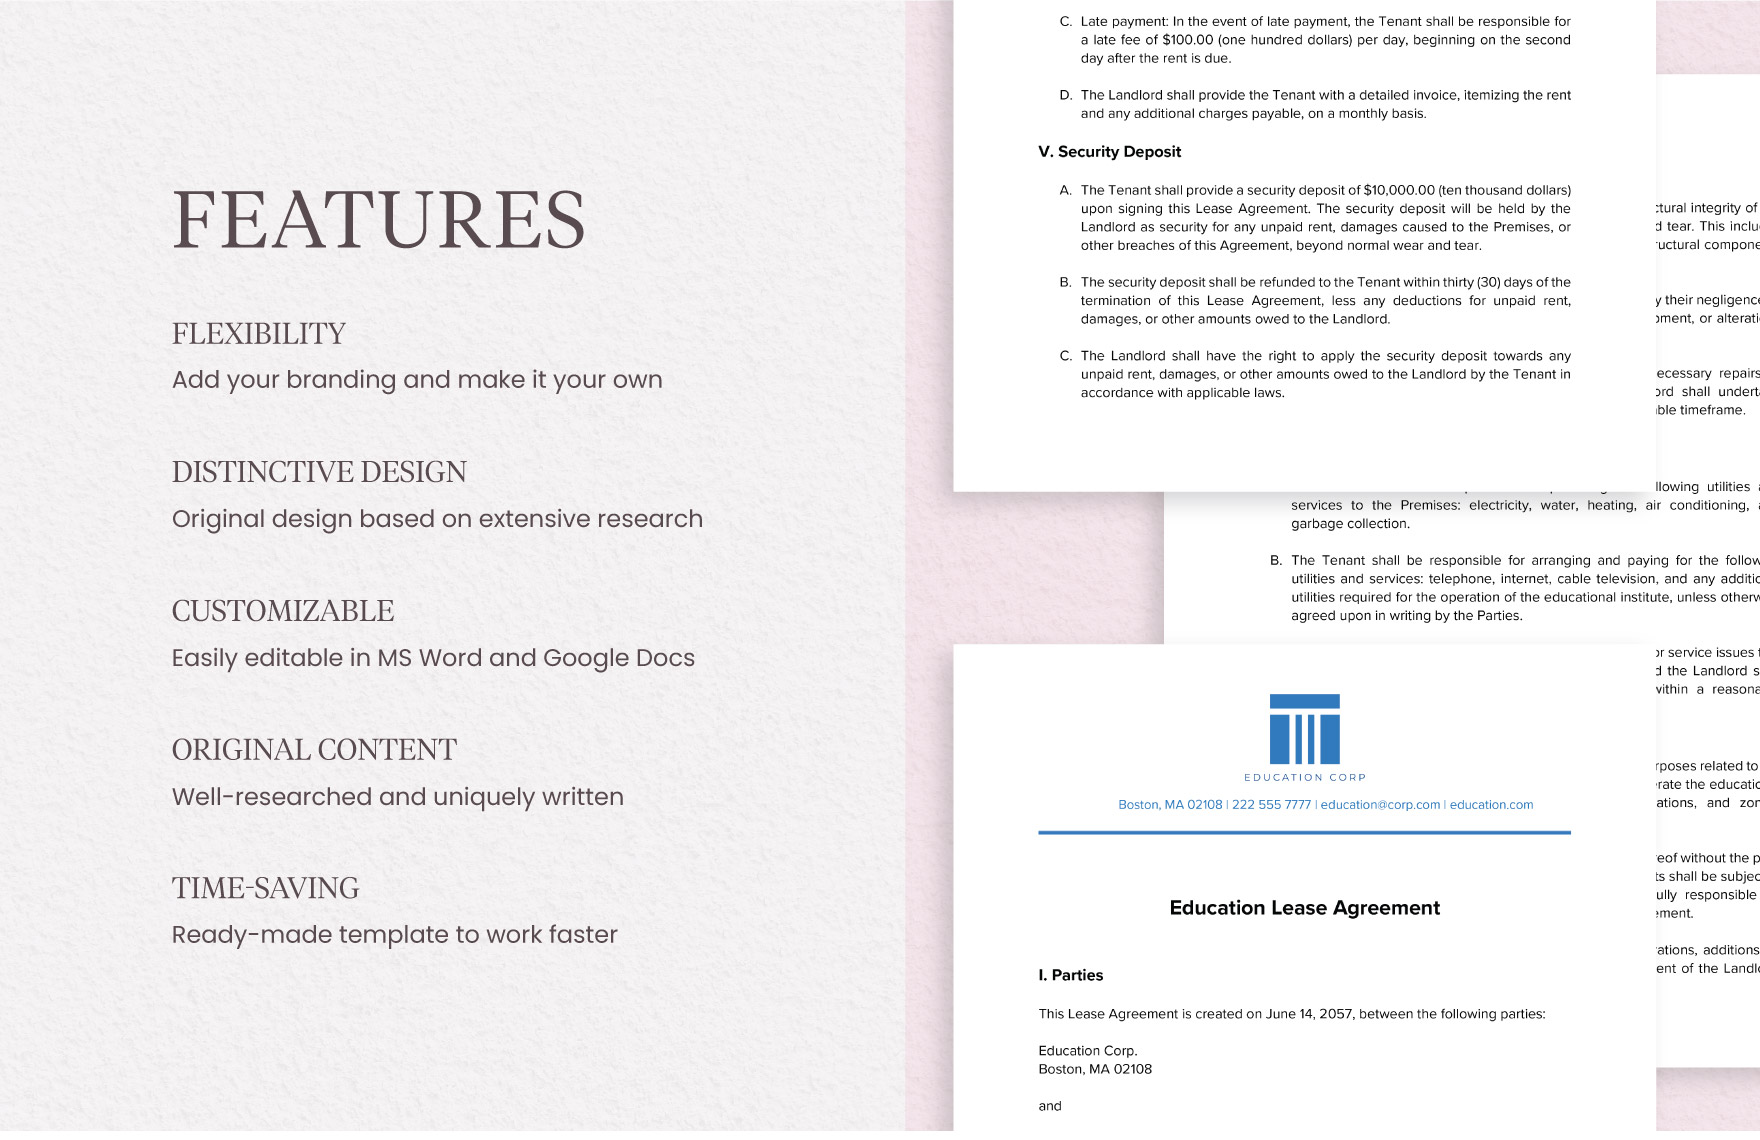 Education Lease Agreement Template in Word, PDF, Google Docs - Download ...